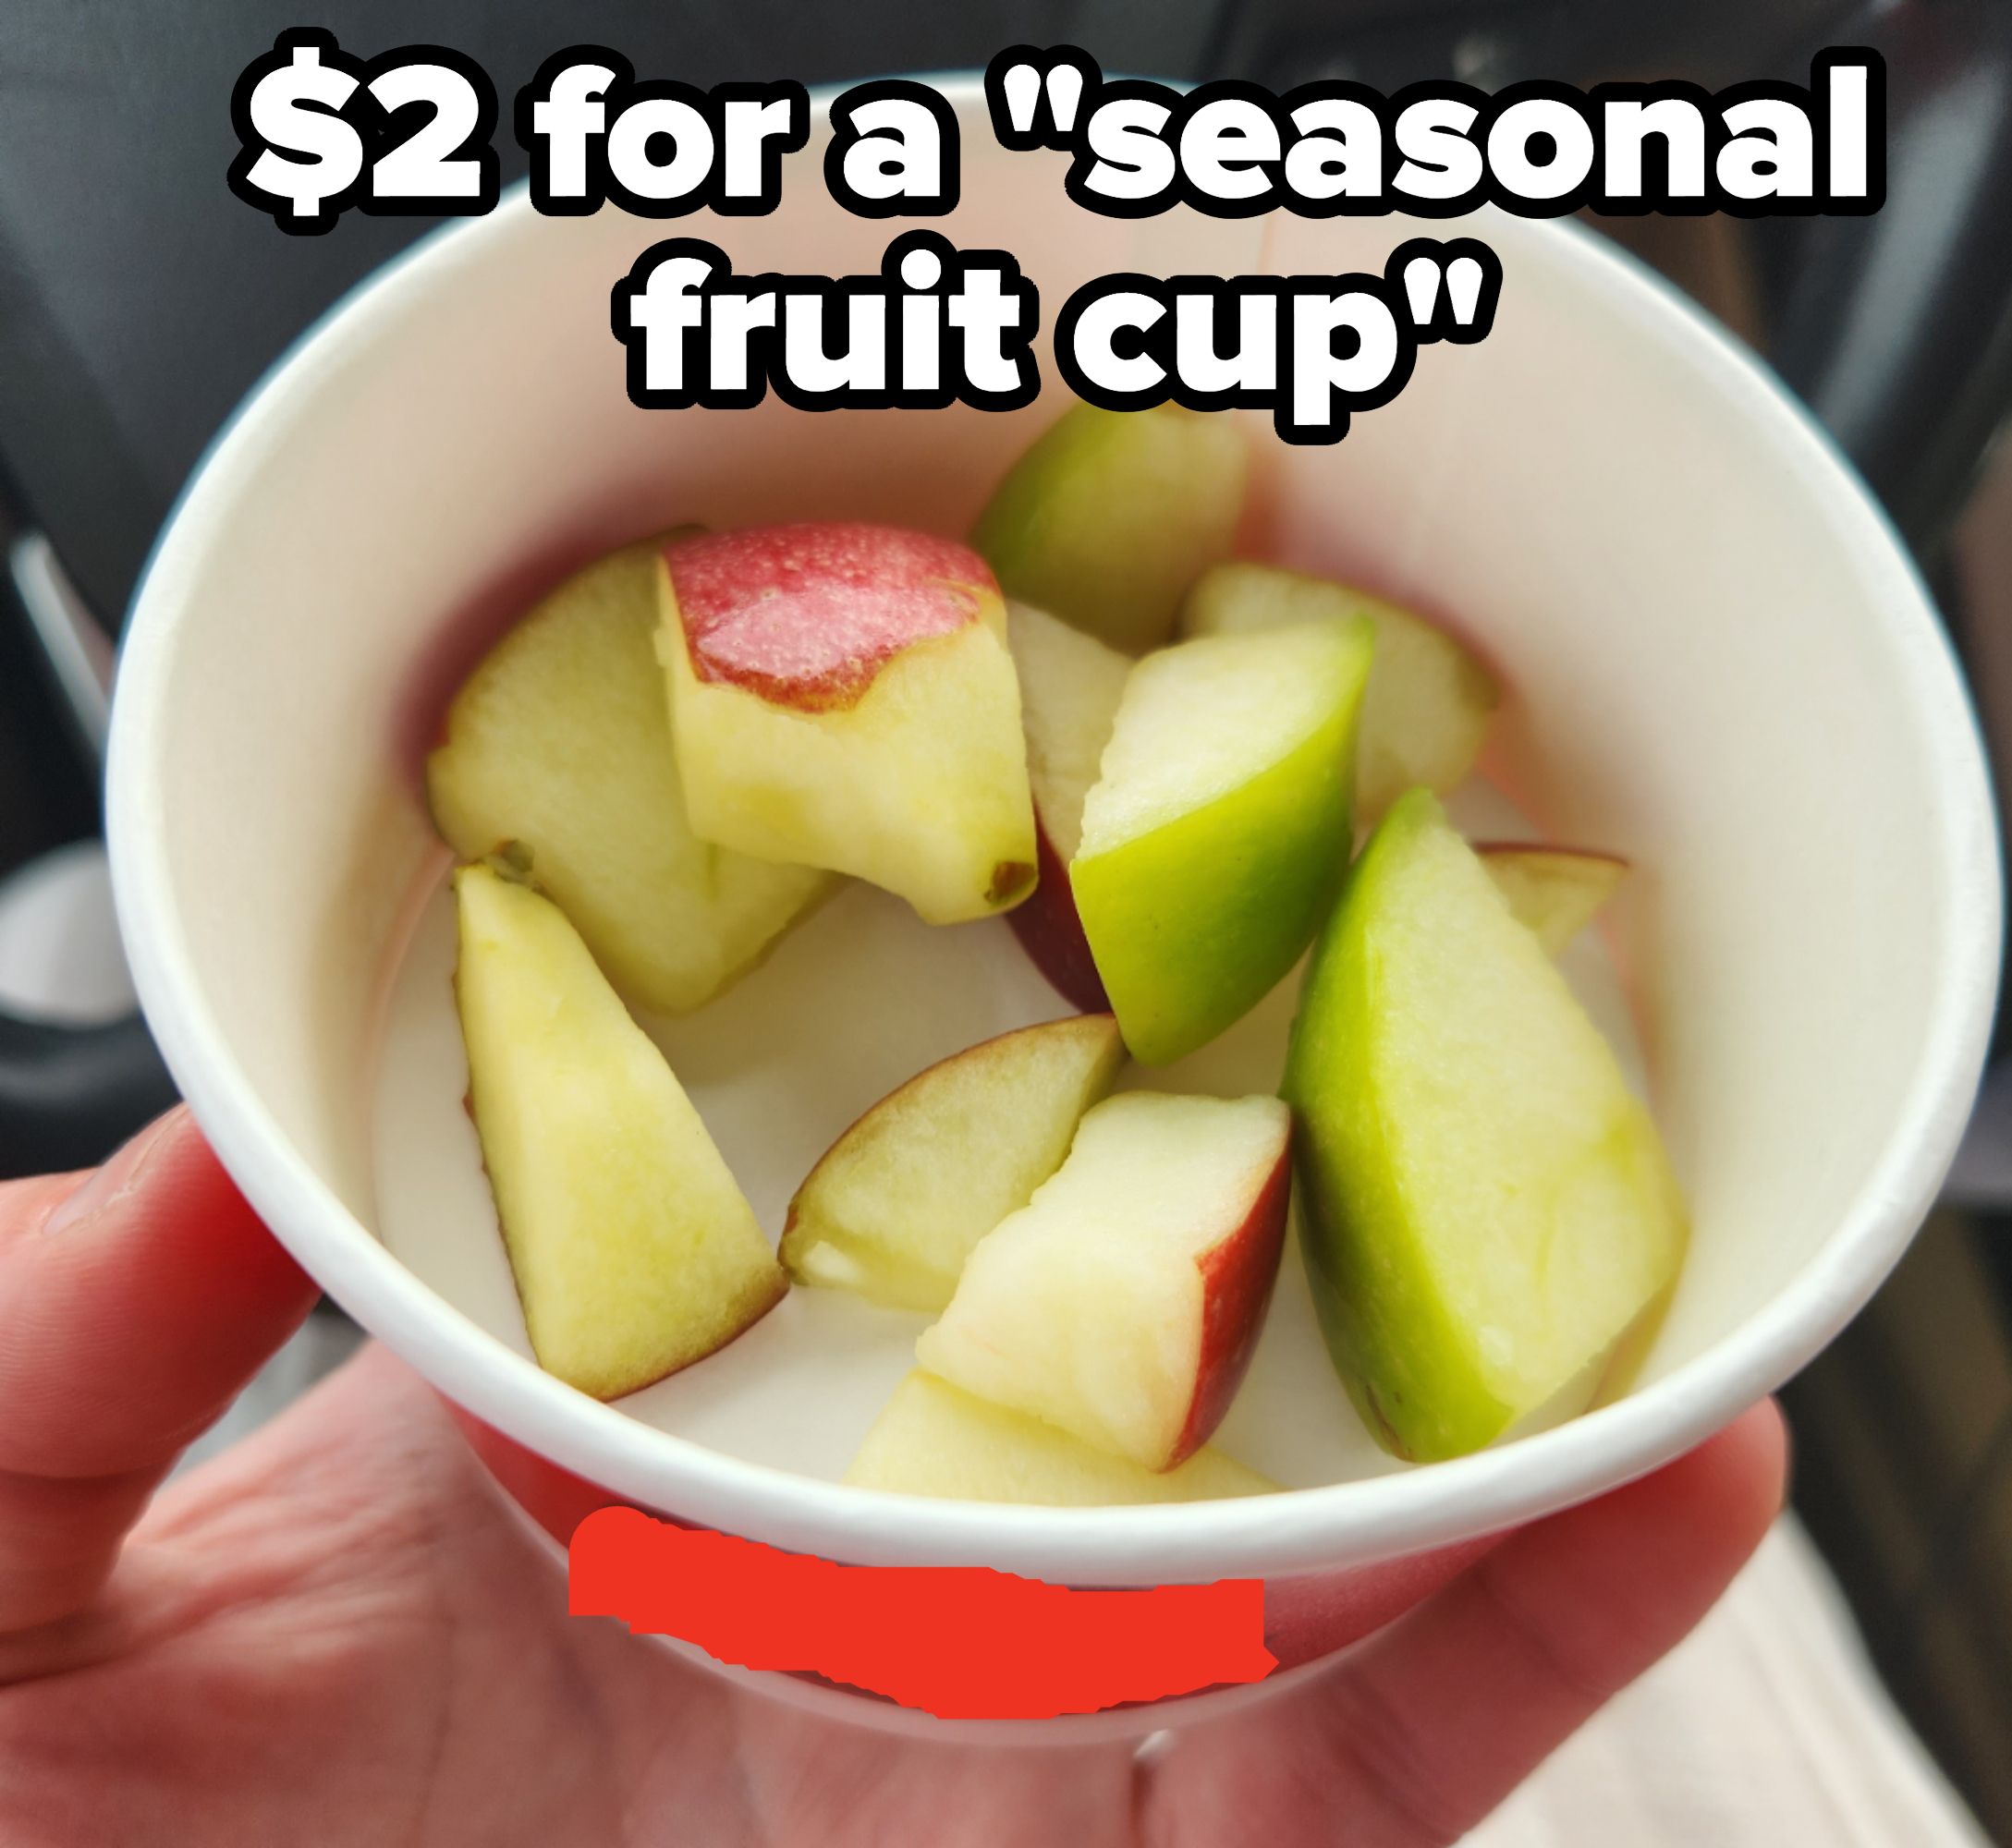 &quot;$2 for a &#x27;seasonal fruit cup&#x27;&quot;